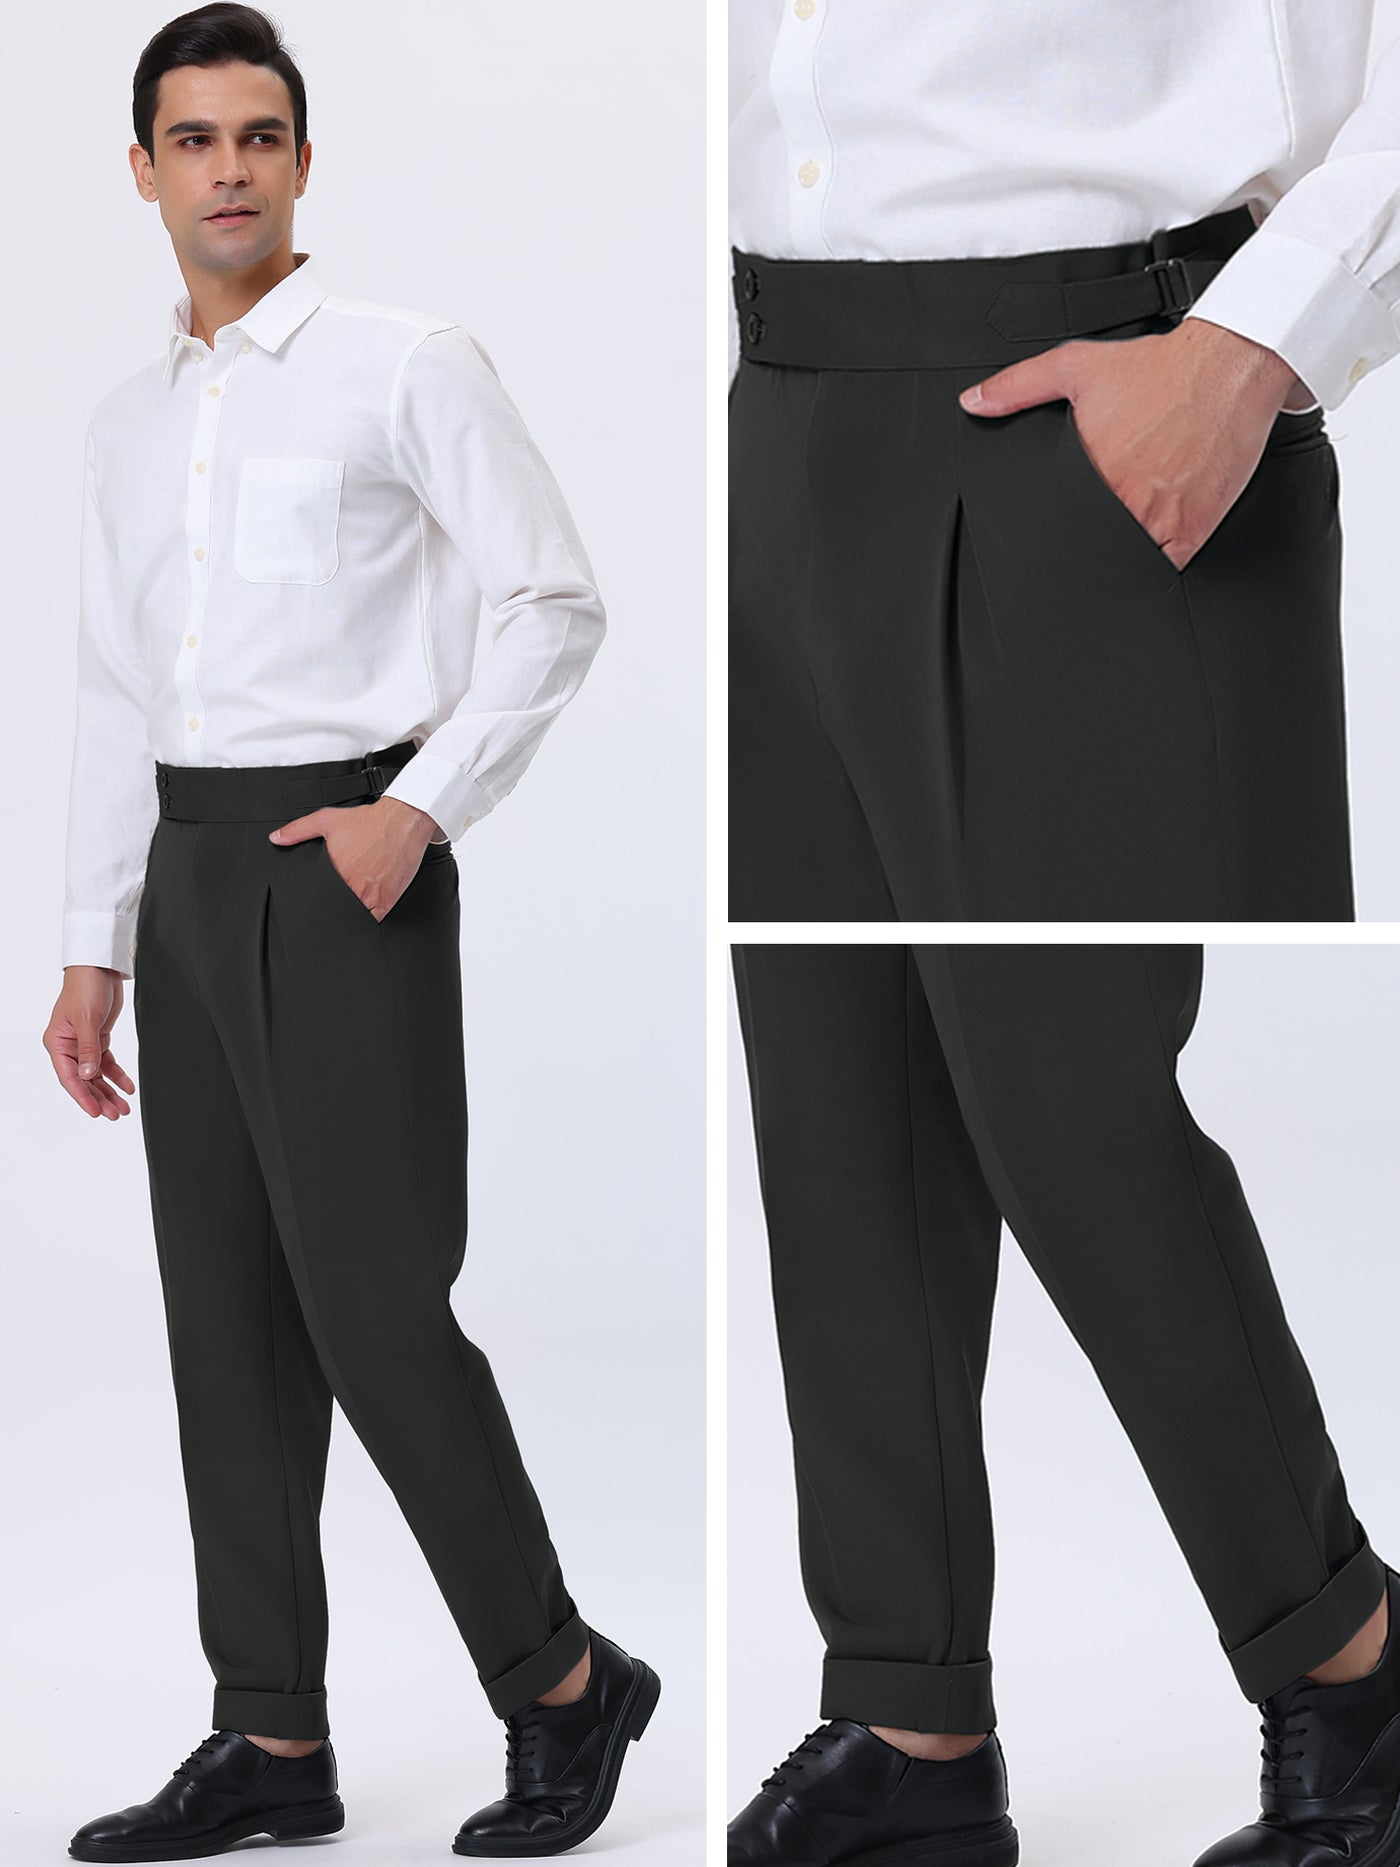 Bublédon Men's Tapered Expandable Waist Stretch Pleated Front Trousers